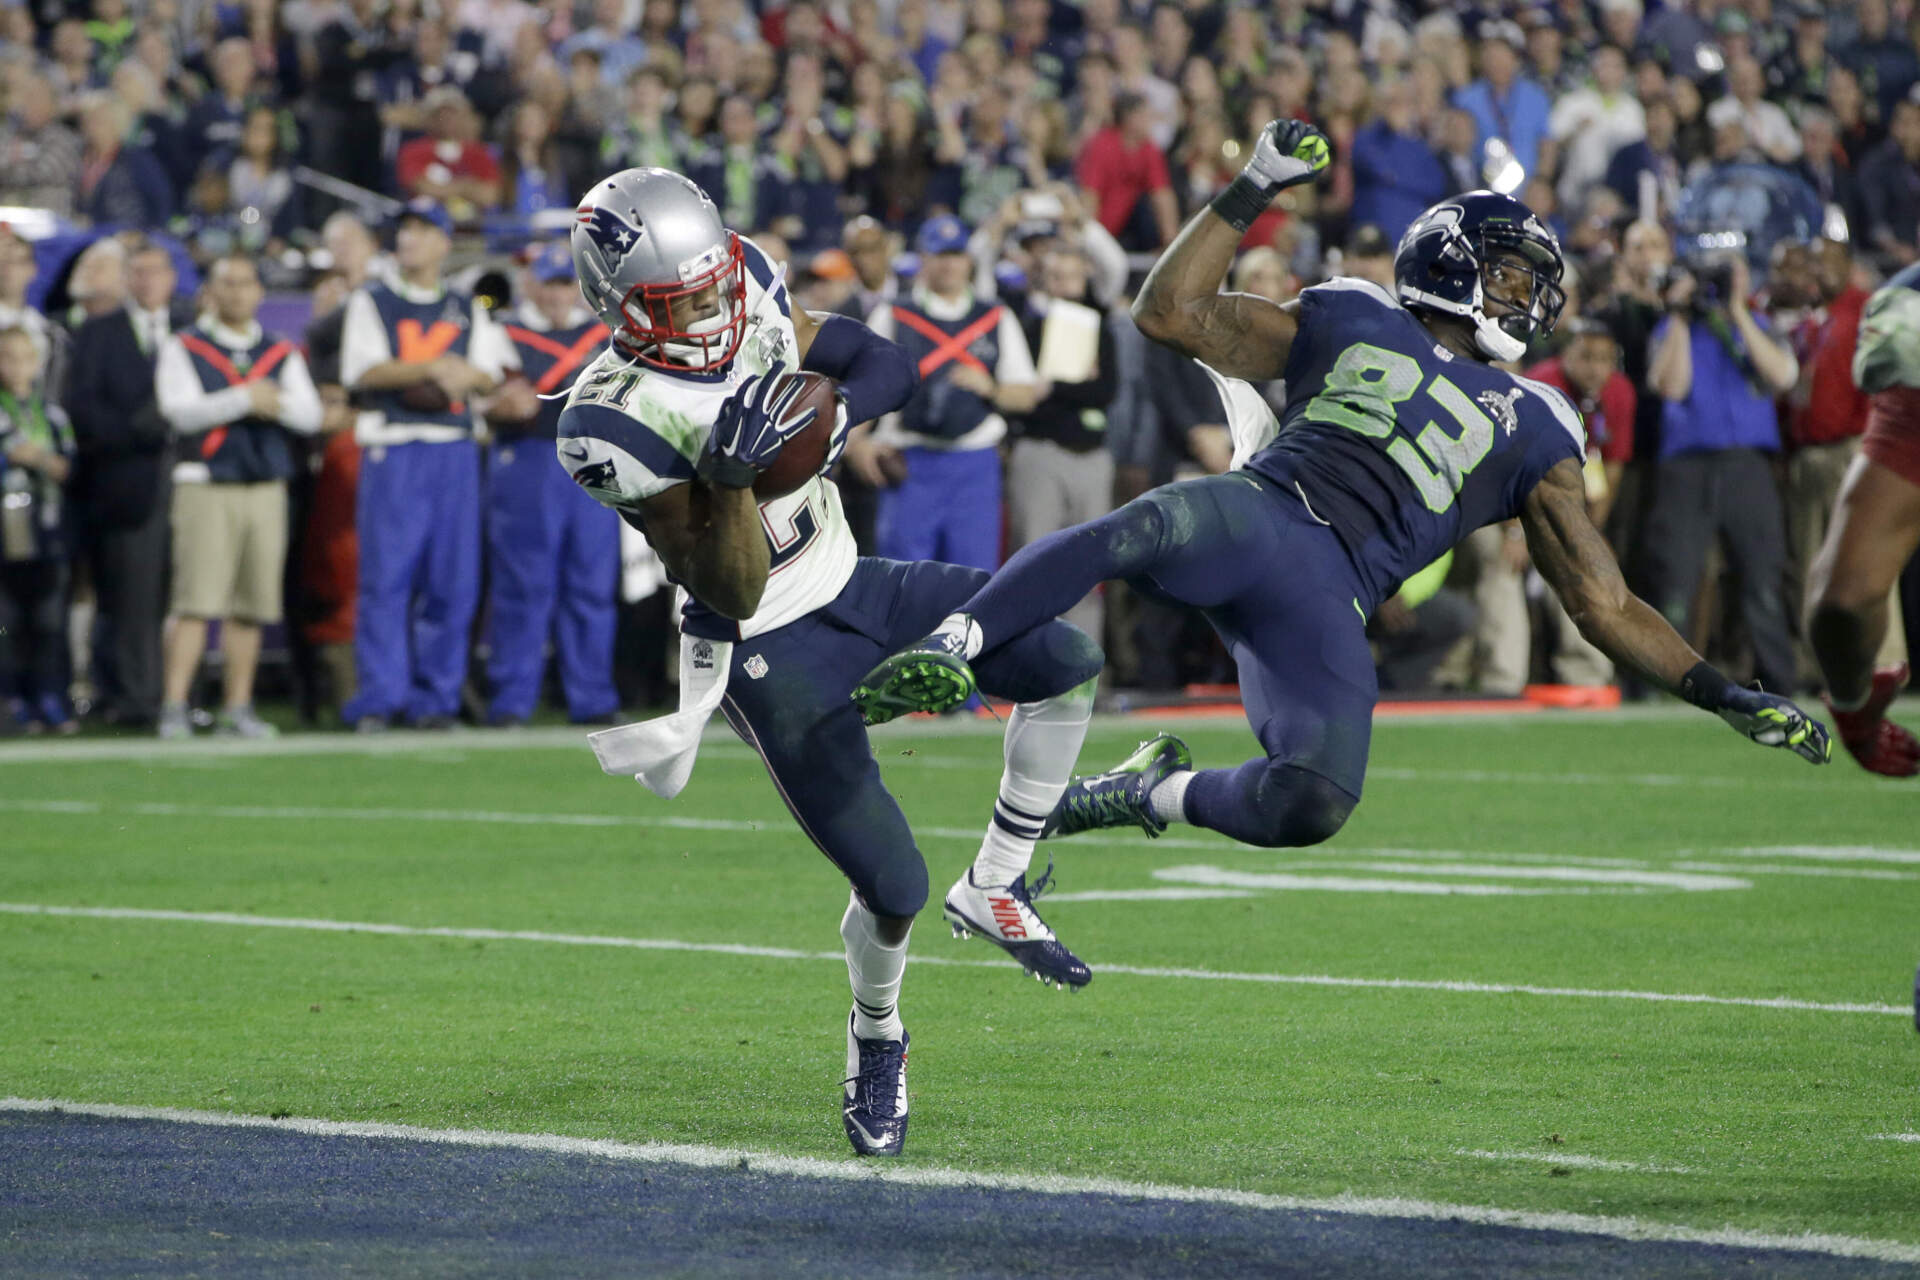 New England Patriots cornerback Malcolm Butler intercepts a pass intended for Seattle Seahawks wide receiver Ricardo Lockette during the second half of NFL Super Bowl XLIX football game Sunday, Feb. 1, 2015, in Glendale, Ariz. (AP Photo/Kathy Willens)